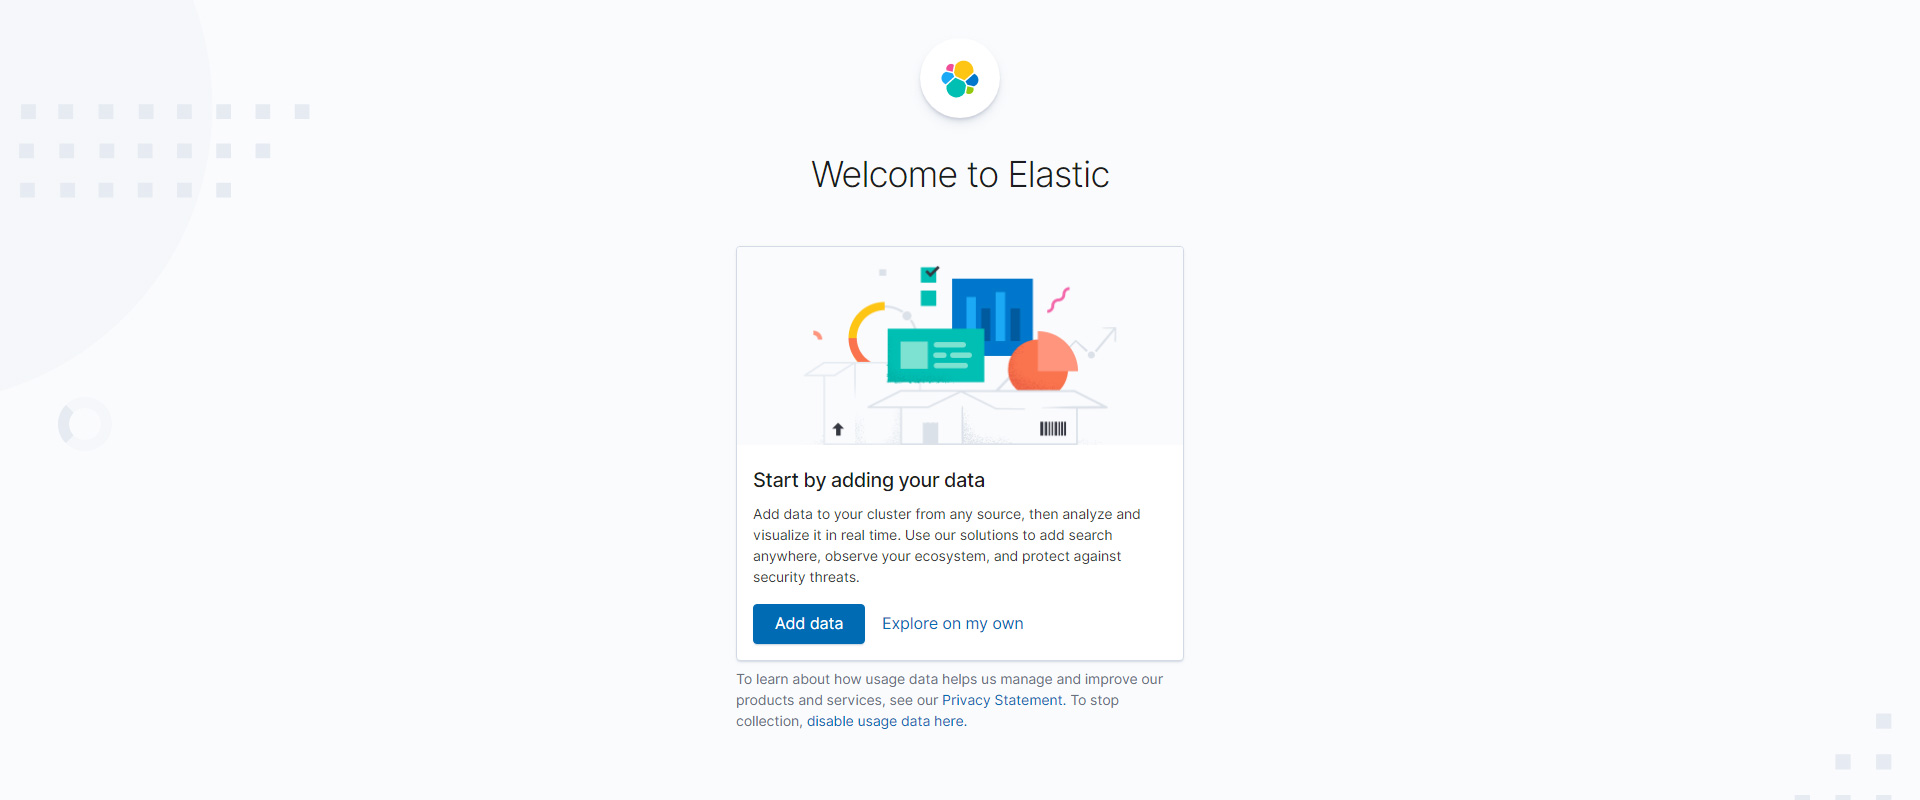 testsoft.net welcome to elastic